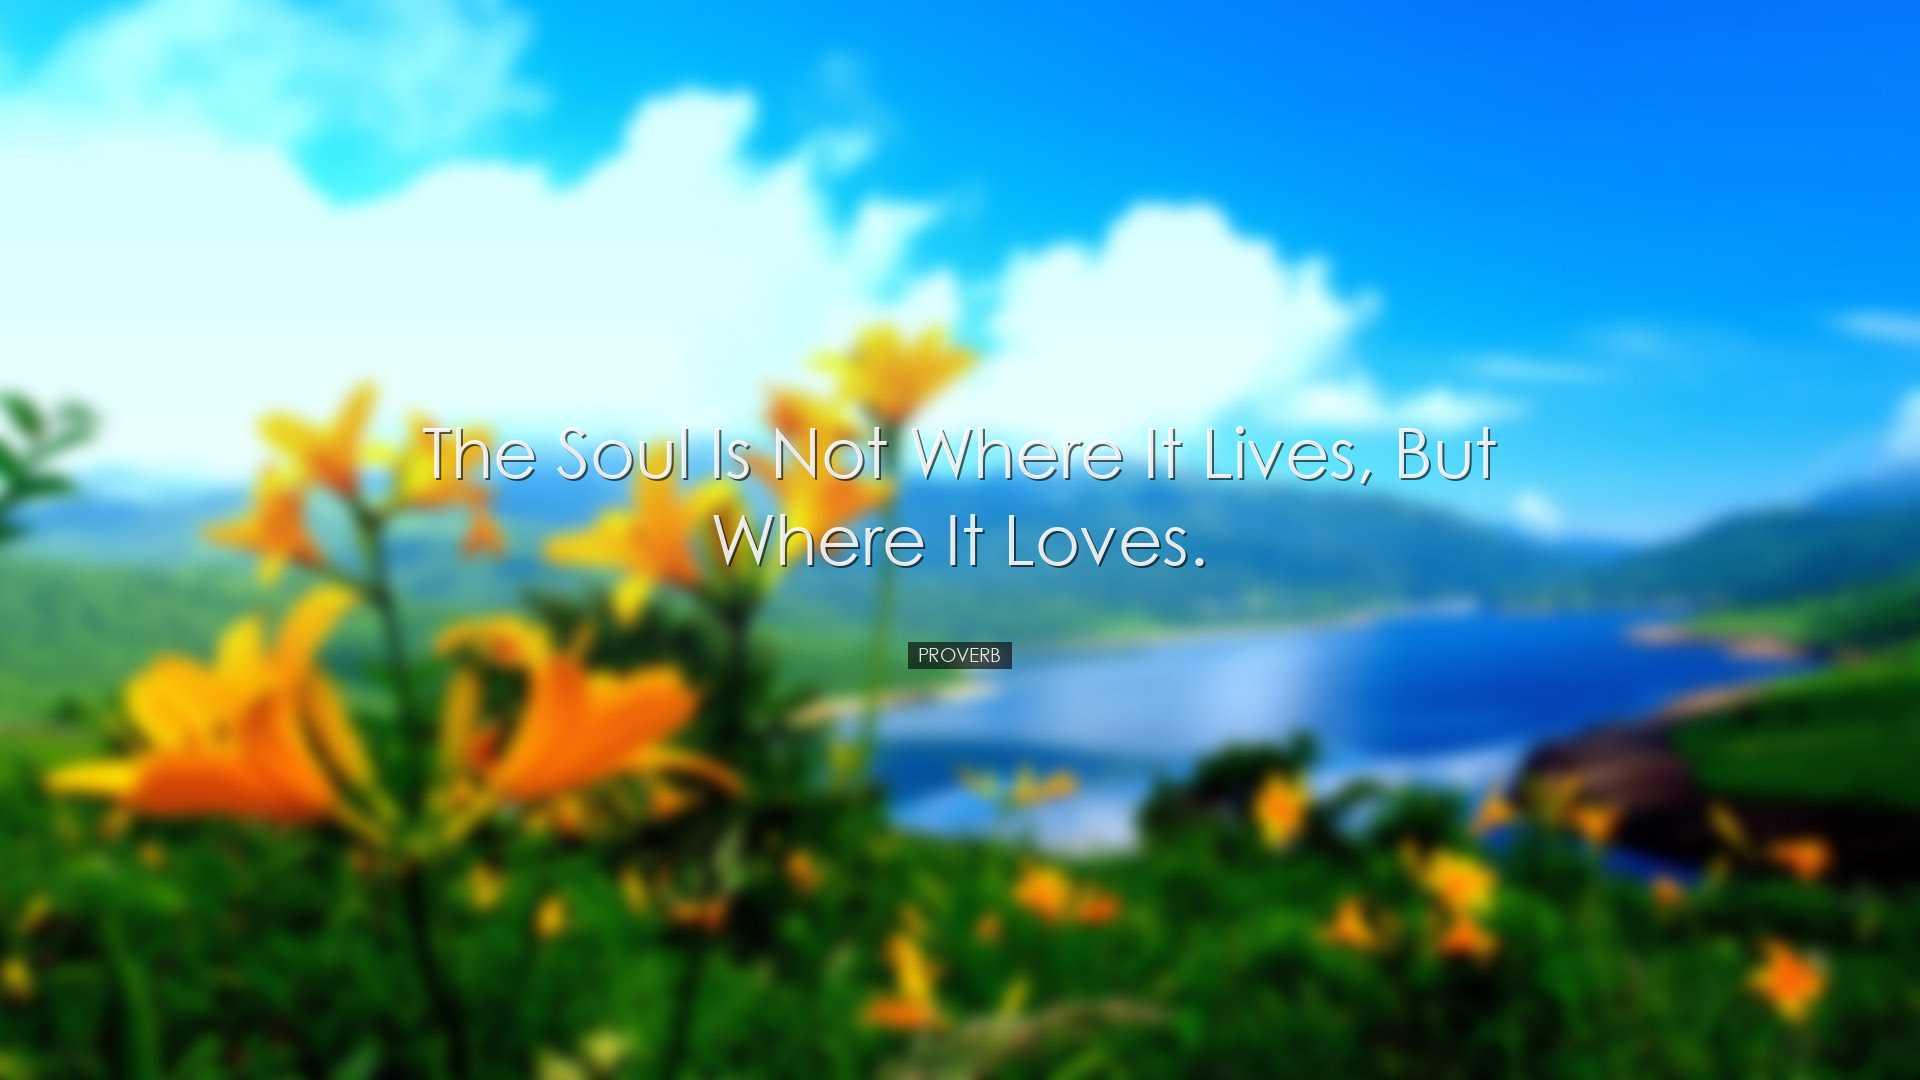 The soul is not where it lives, but where it loves. - Proverb